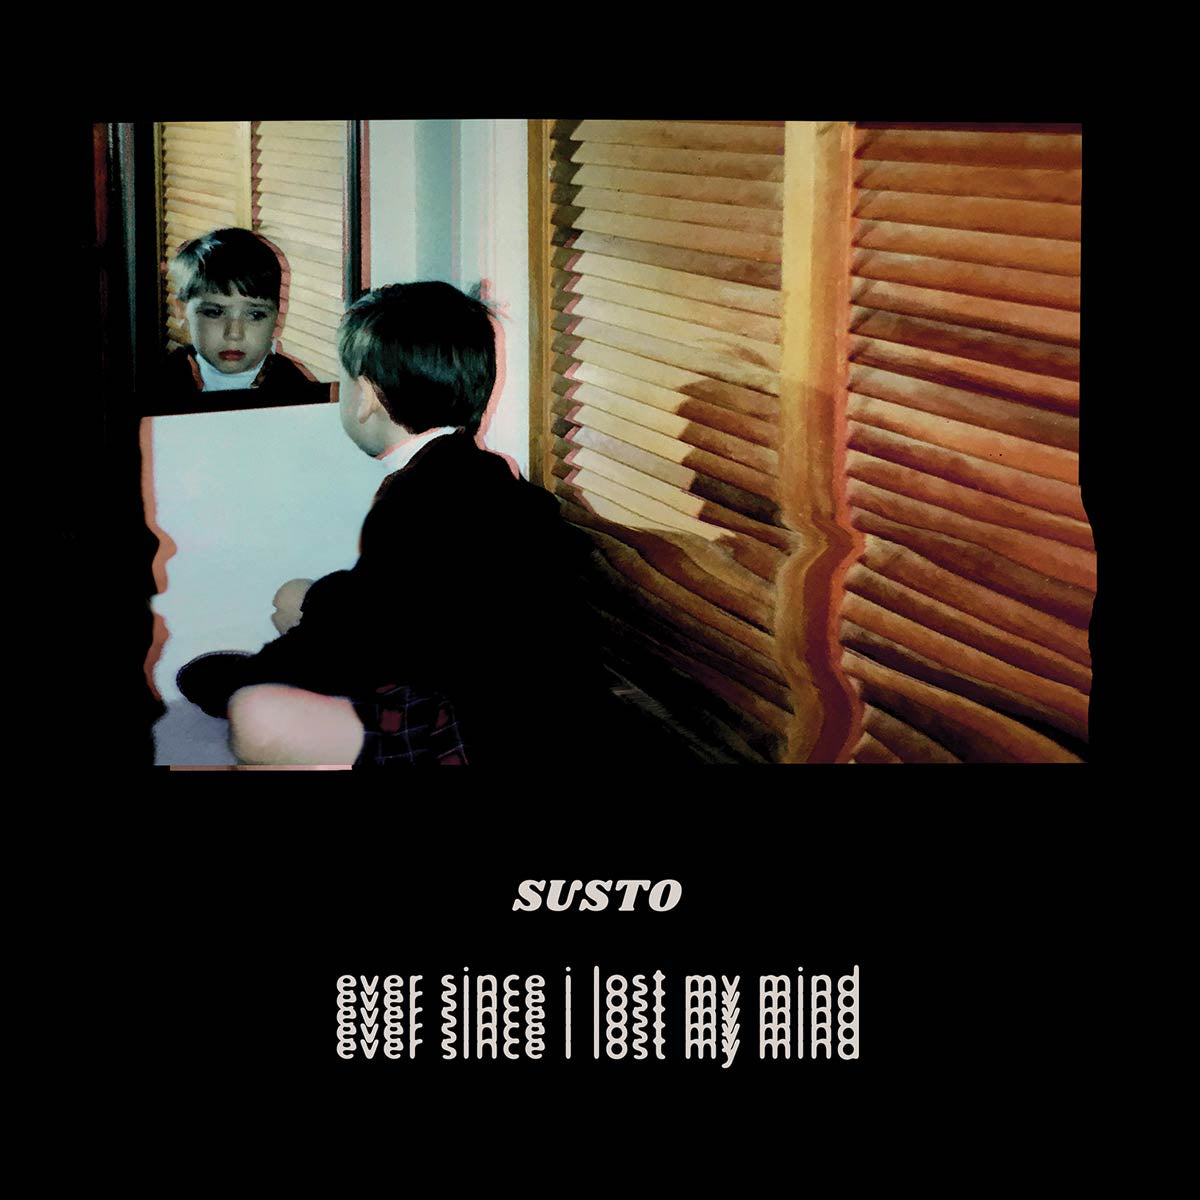 SUSTO - Ever Since I Lost My Mind - New Vinyl Lp 2019 Rounder Pressing with Gatefold Jacket - Alt- Country / Americana